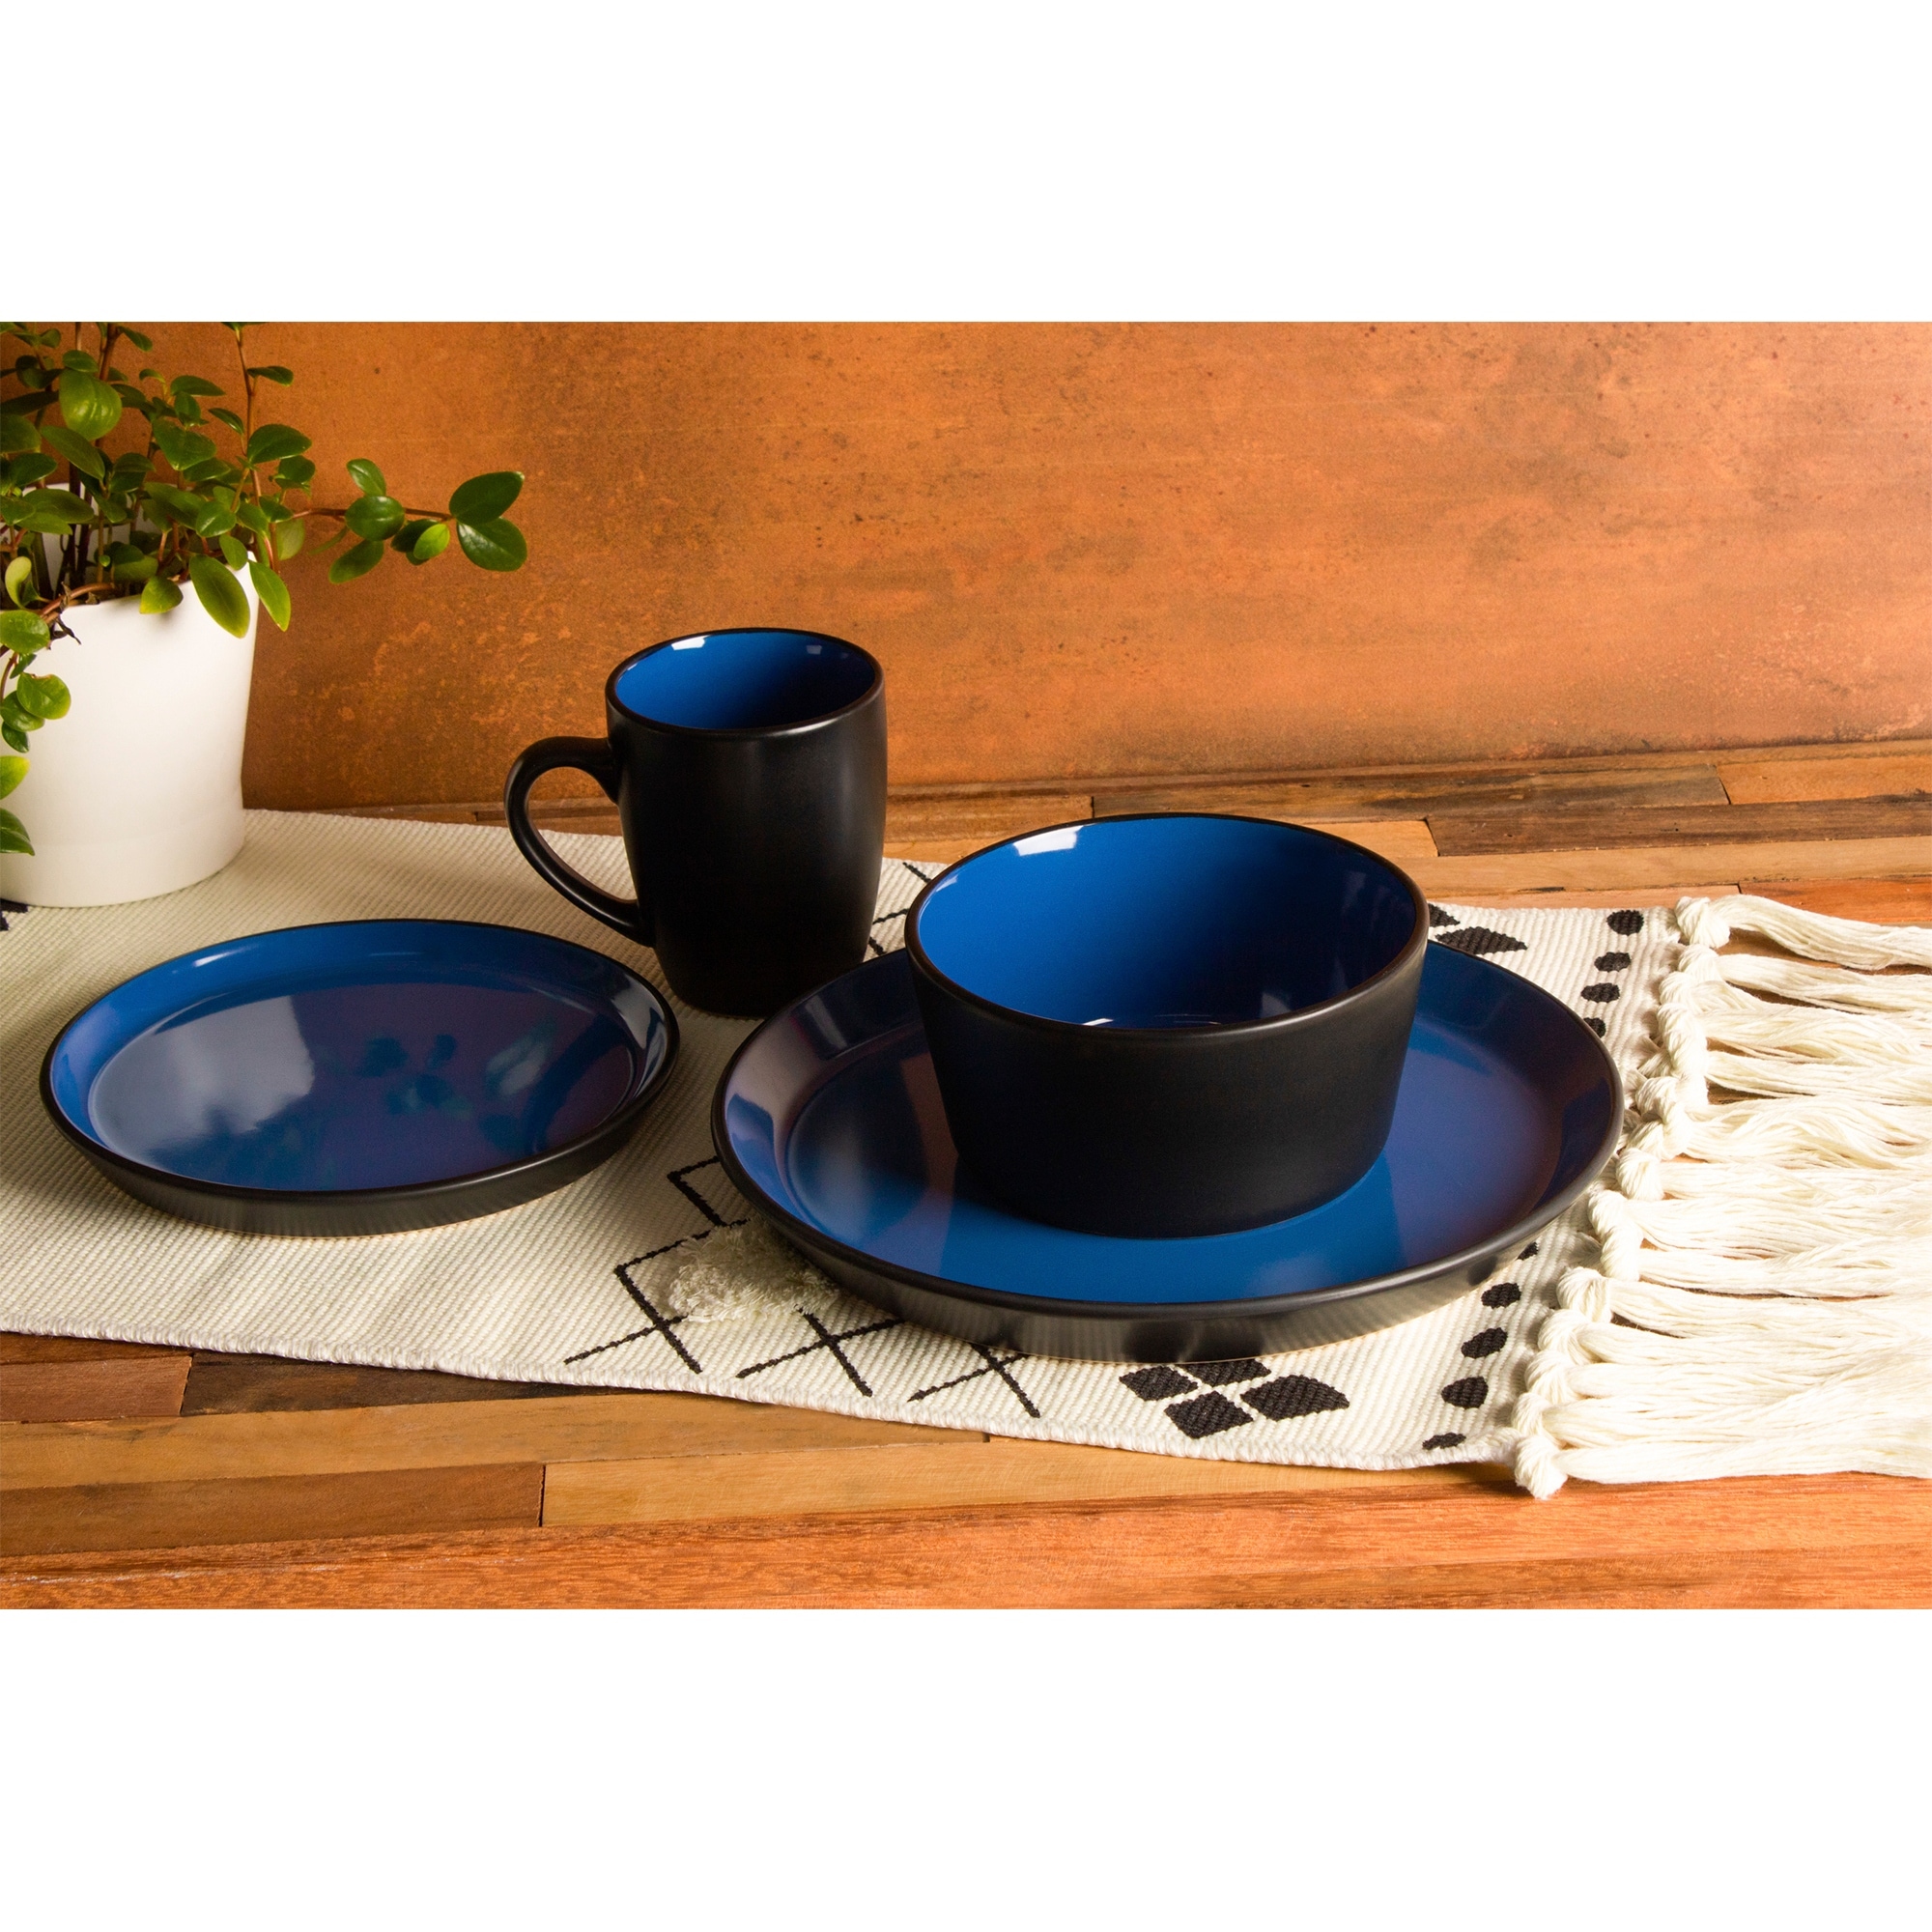 All Seasons Kitchen and Dining - Bed Bath & Beyond